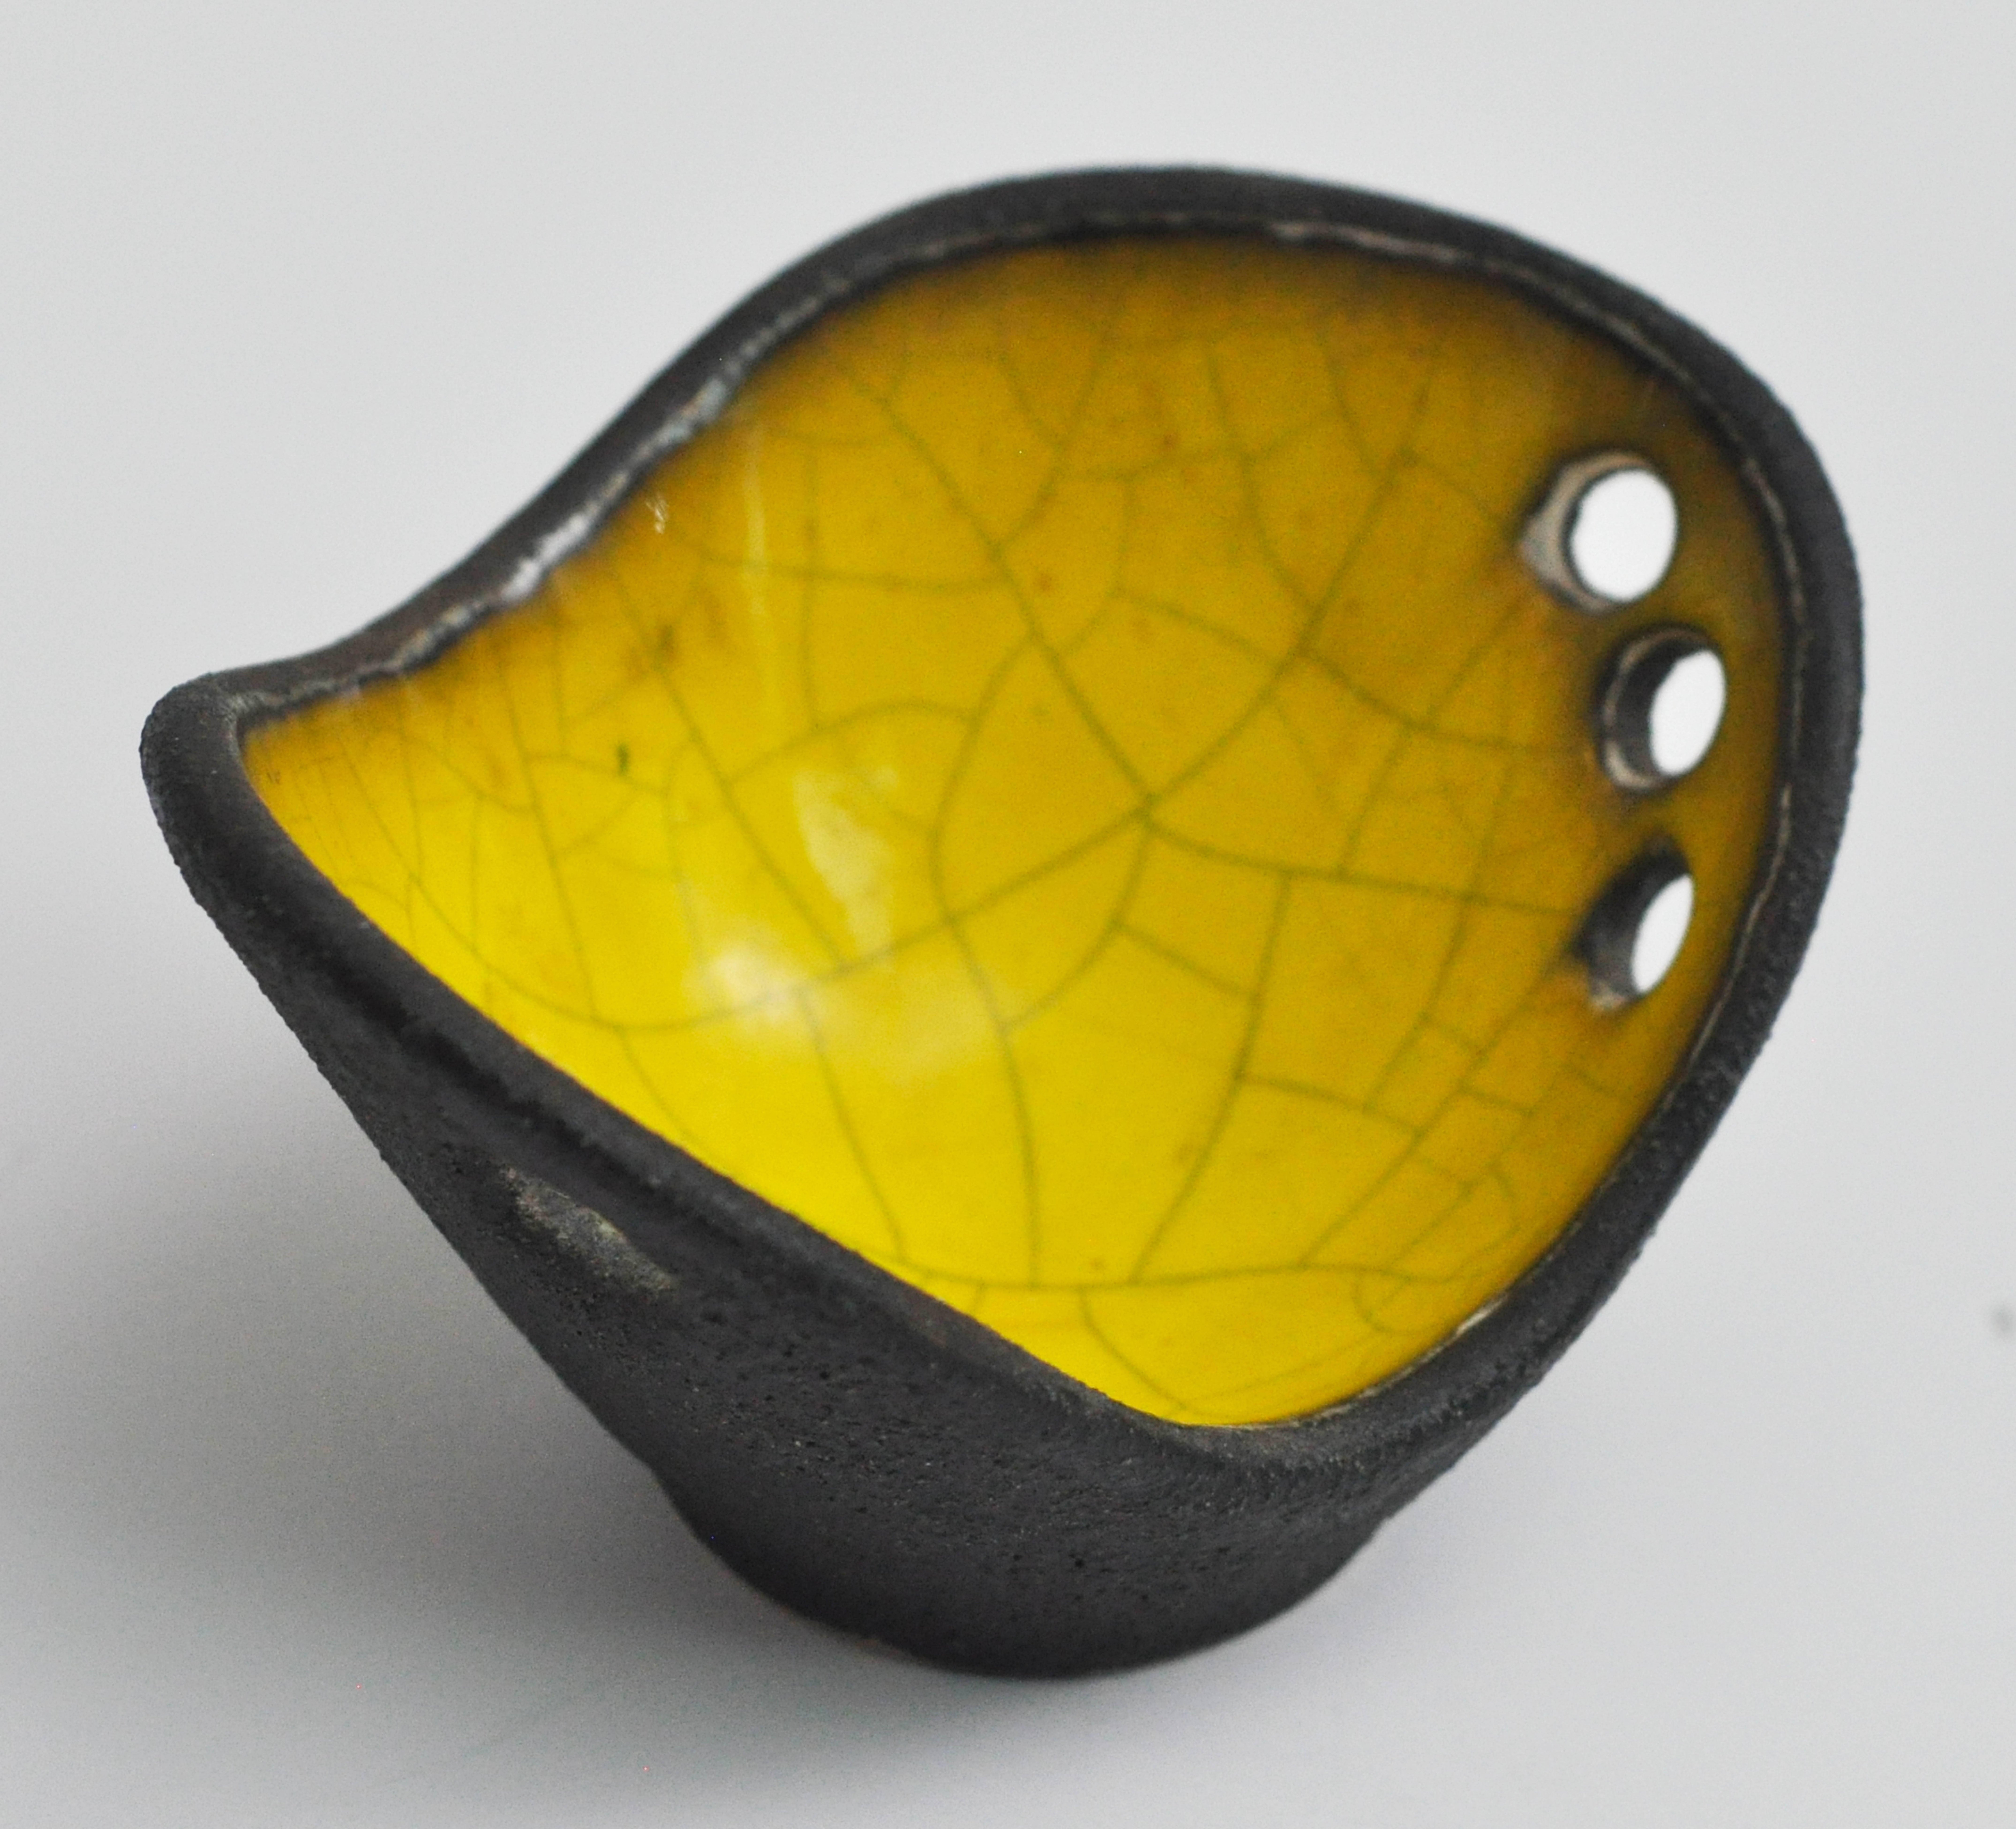 A small sculptural bowl with perforated sides by the French ceramist Gilbert Valentin (1928-2001). Valentin masterfully combines a strong canary yellow, interior crackle glaze with a dark gritty exterior giving the work a sense of mystery. Signed